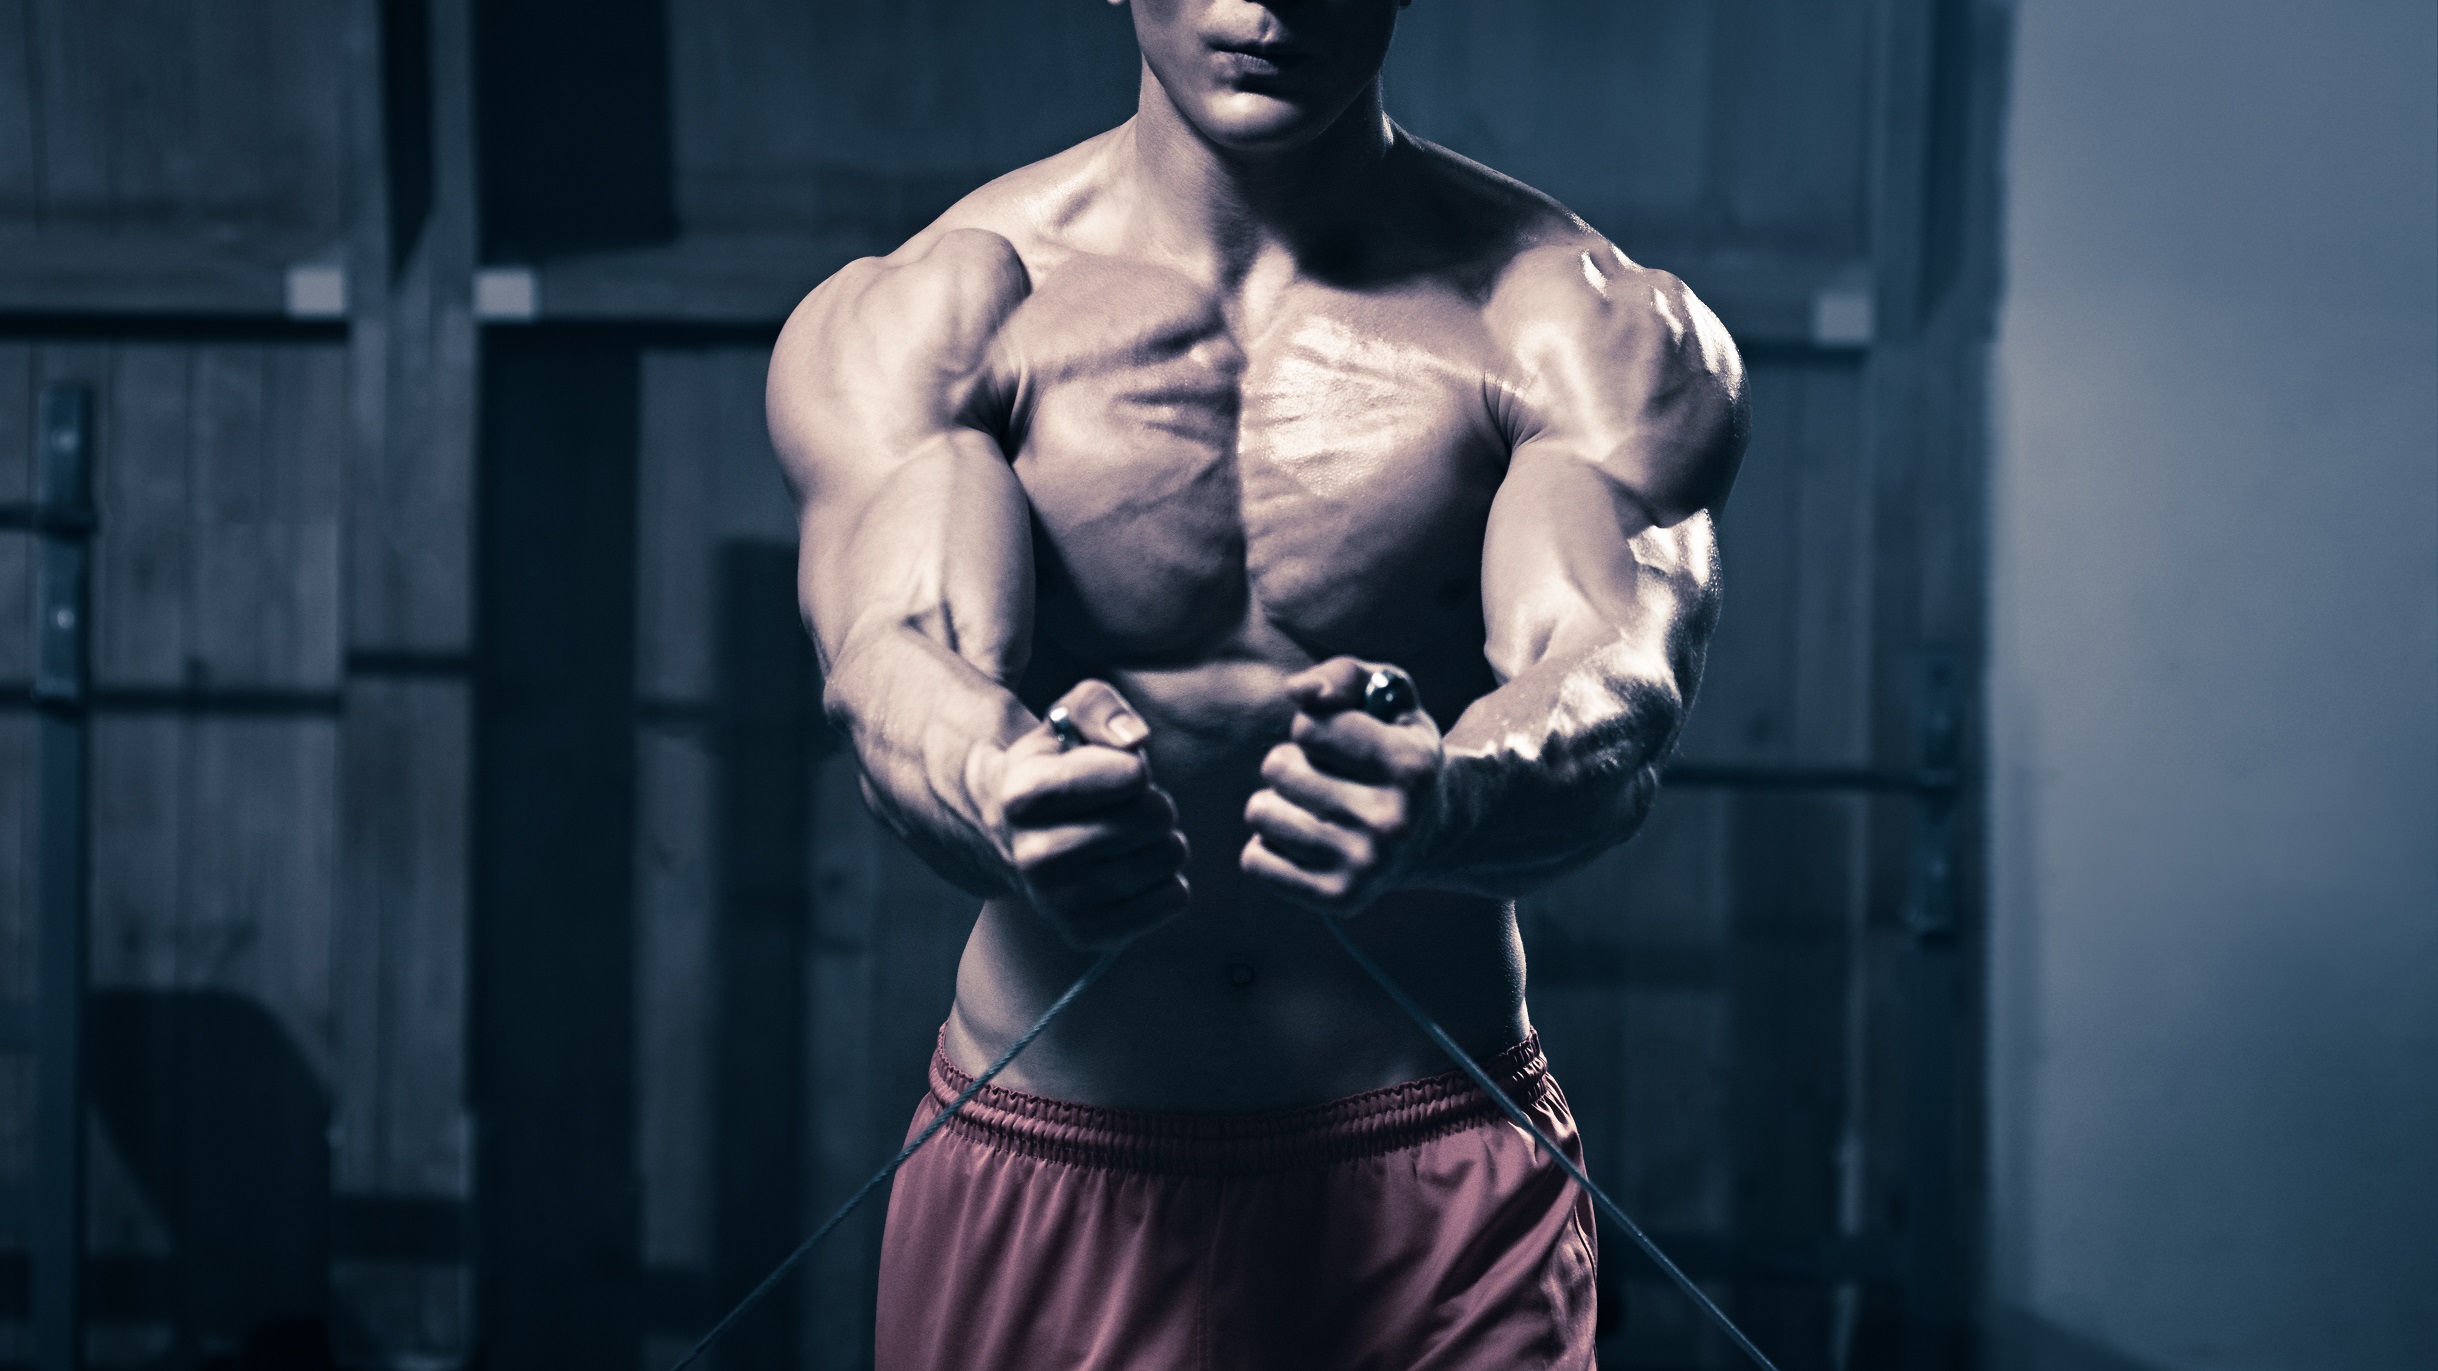 Anatomy of Growth: How to Train Your Chest Muscles